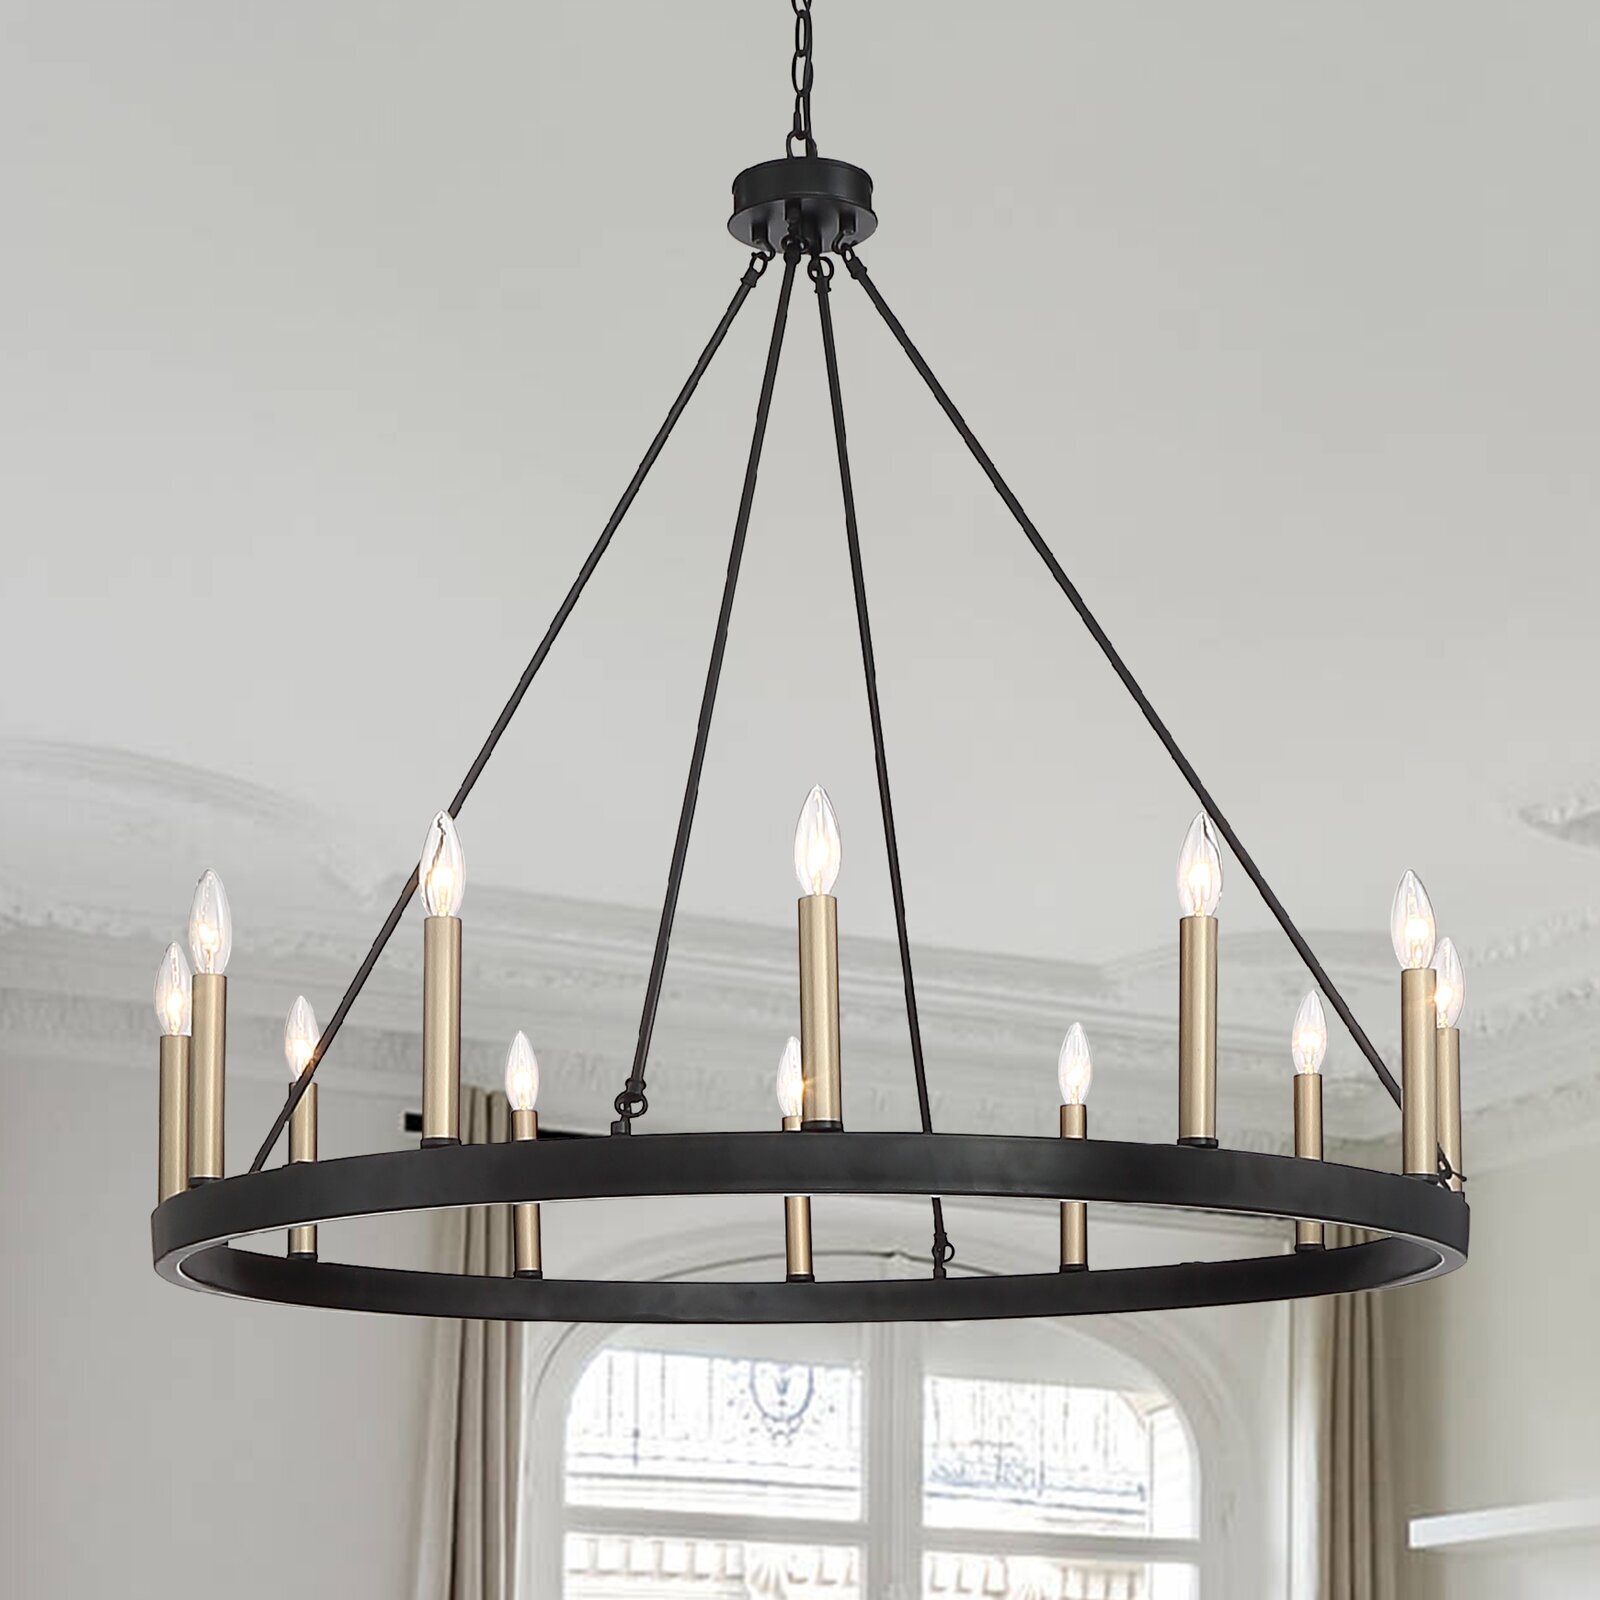 Wagon Wheel shaped Hanging Candle Chandelier